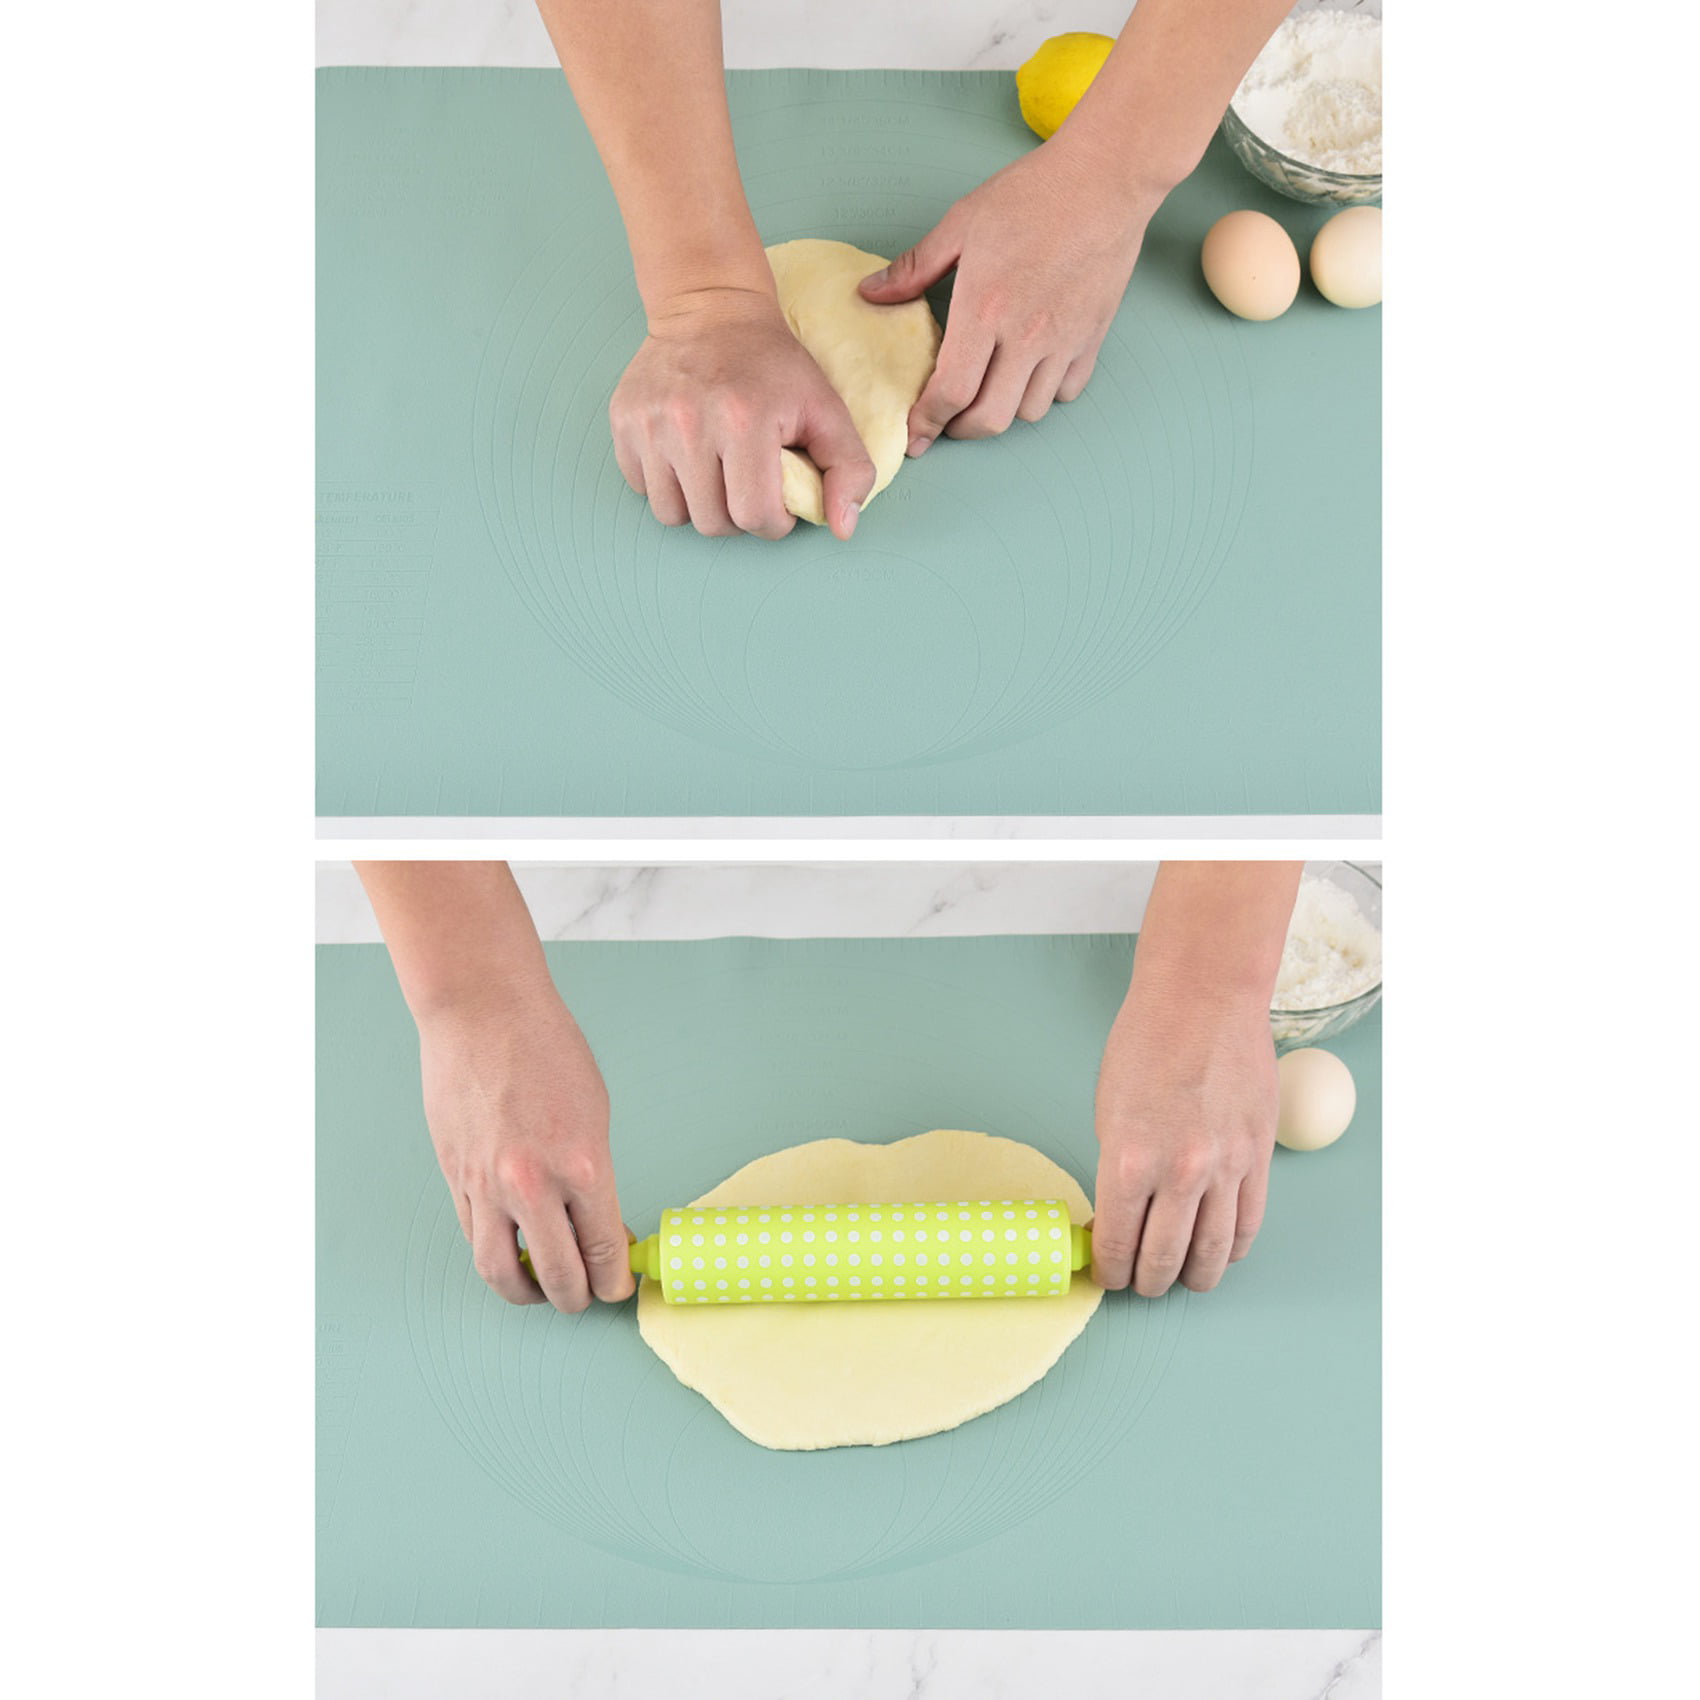 New Extra Large Kitchen Tools Silicone Pad for Rolling Dough Pizza Dough  Non-Stick Maker Holder Kitchen Tools